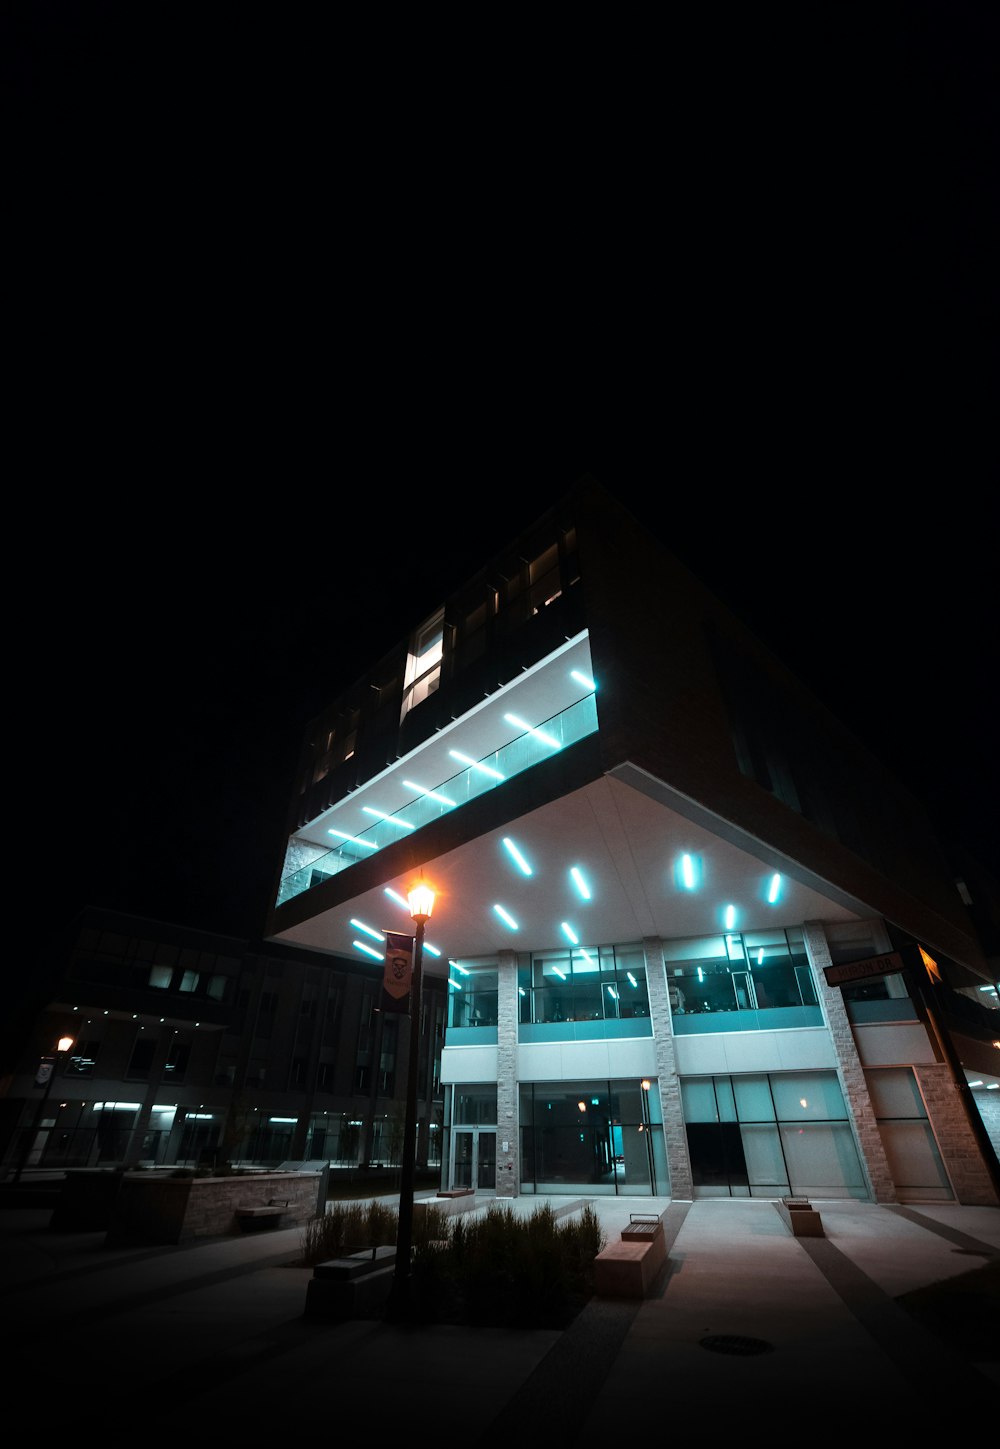 exterior of a multi-storey building during nighttime